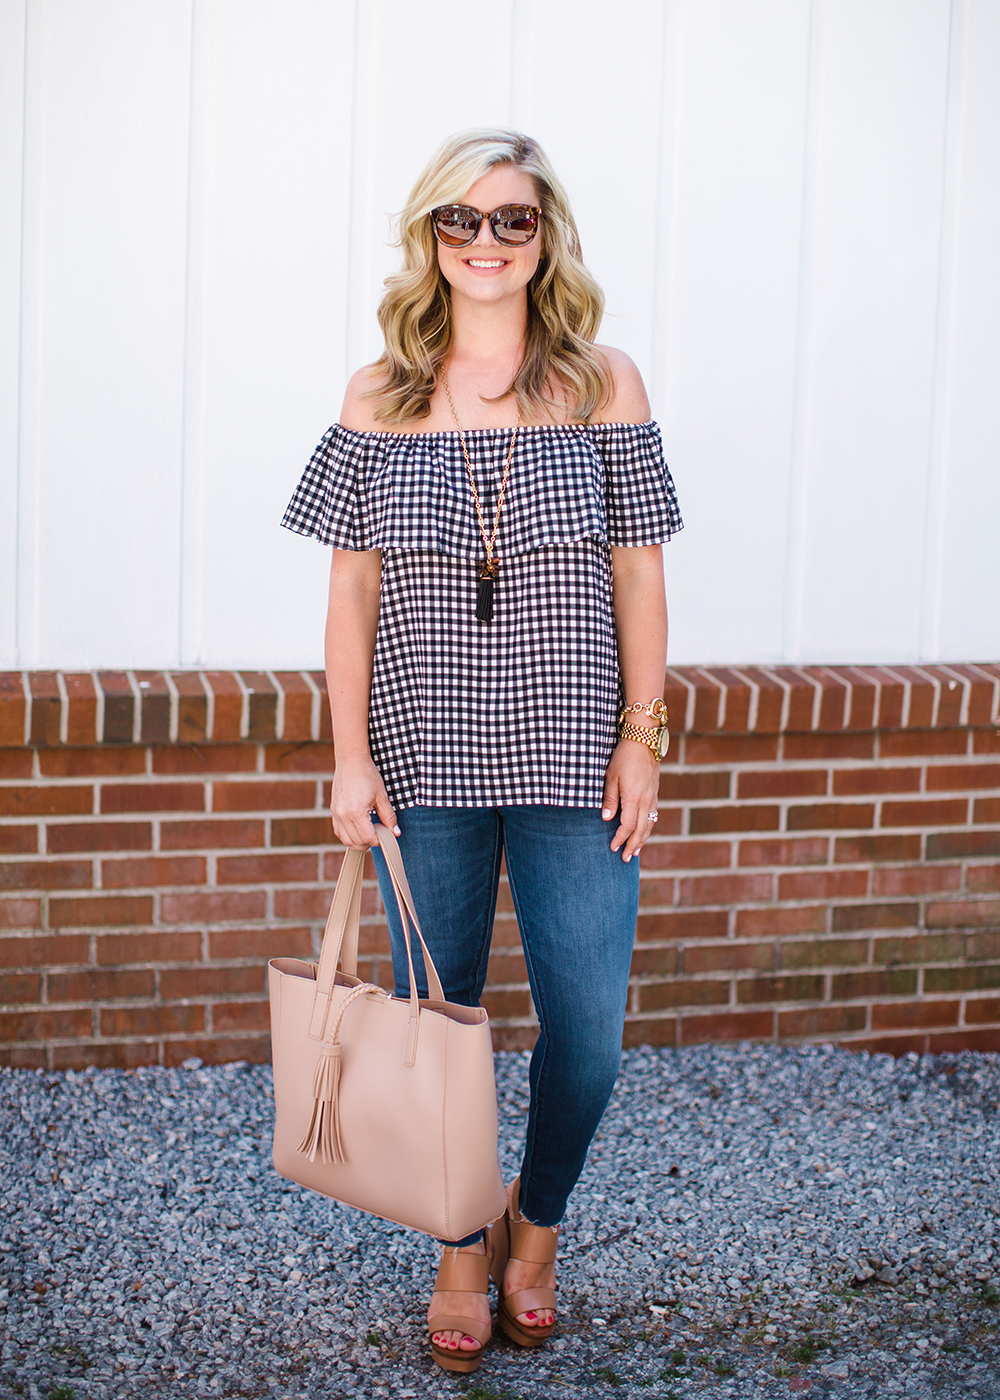 Mom Style Monday, Cristin Cooper, The Southern Style Guide, Gingham, Spring Trends